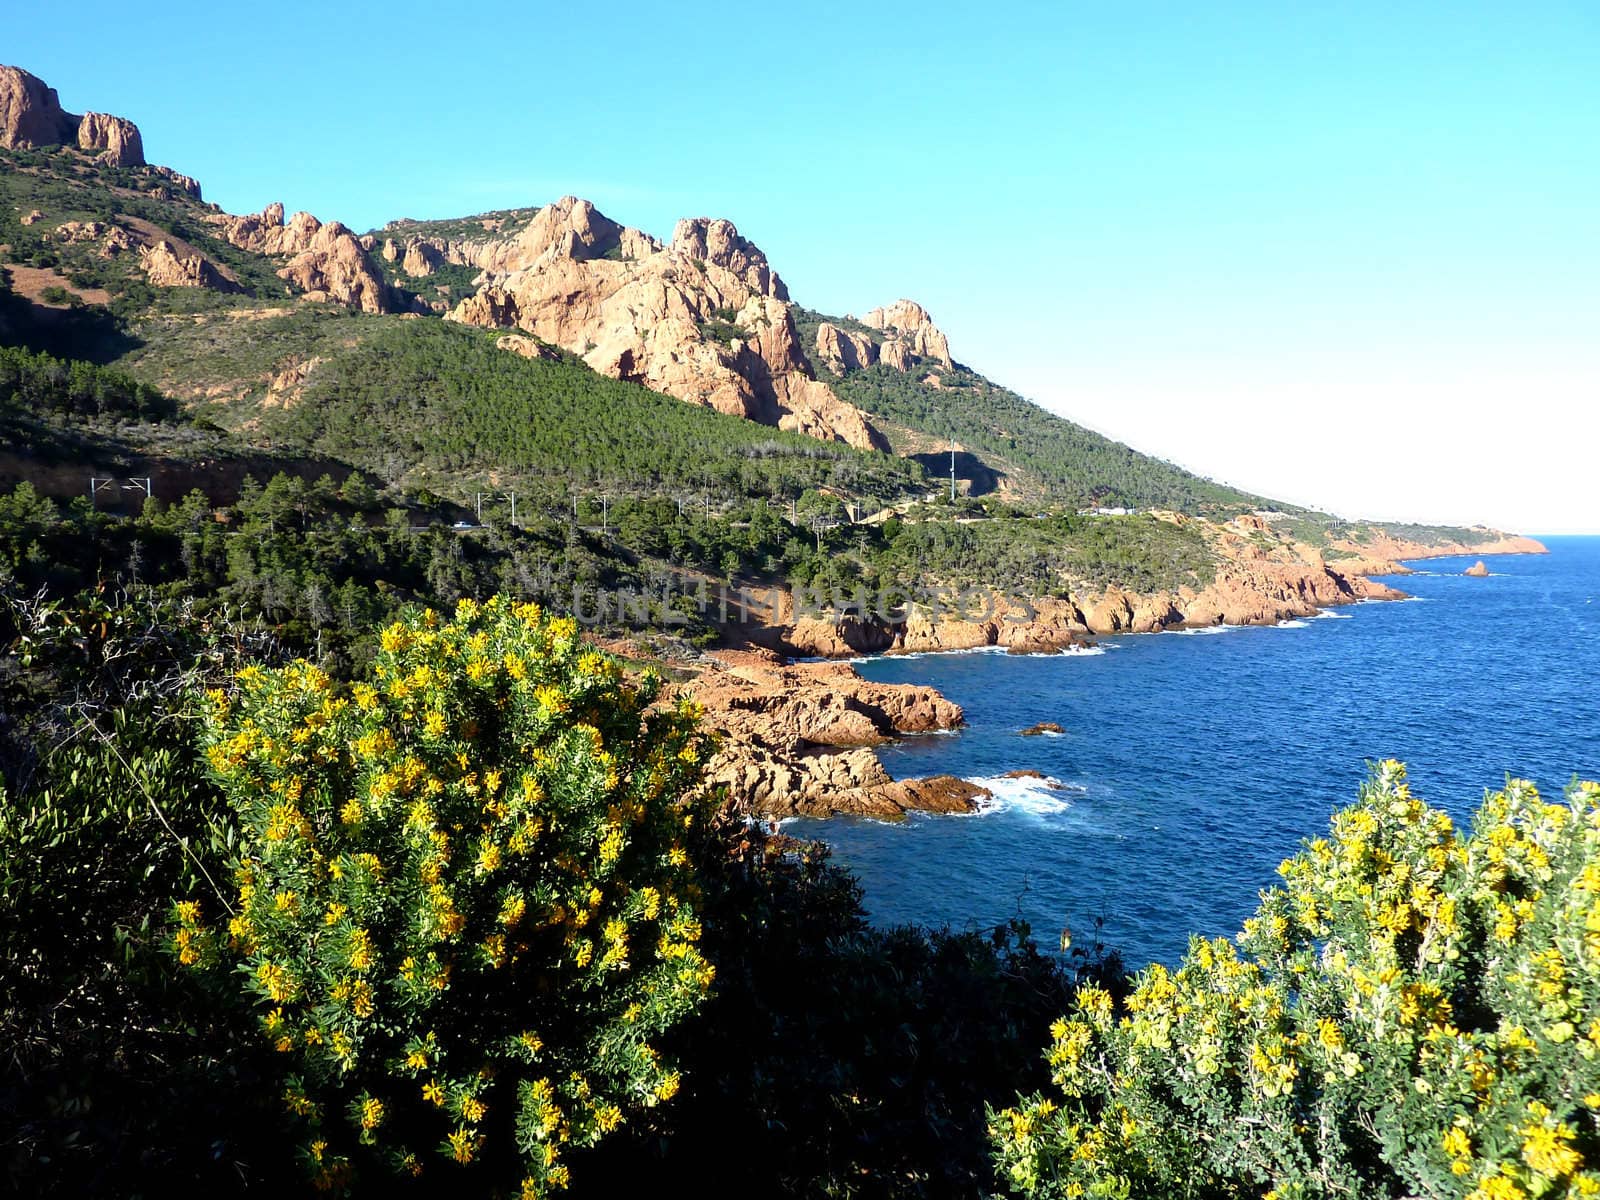 Esterel massif, south of France, and plants and vegetation around, by beautiful weather